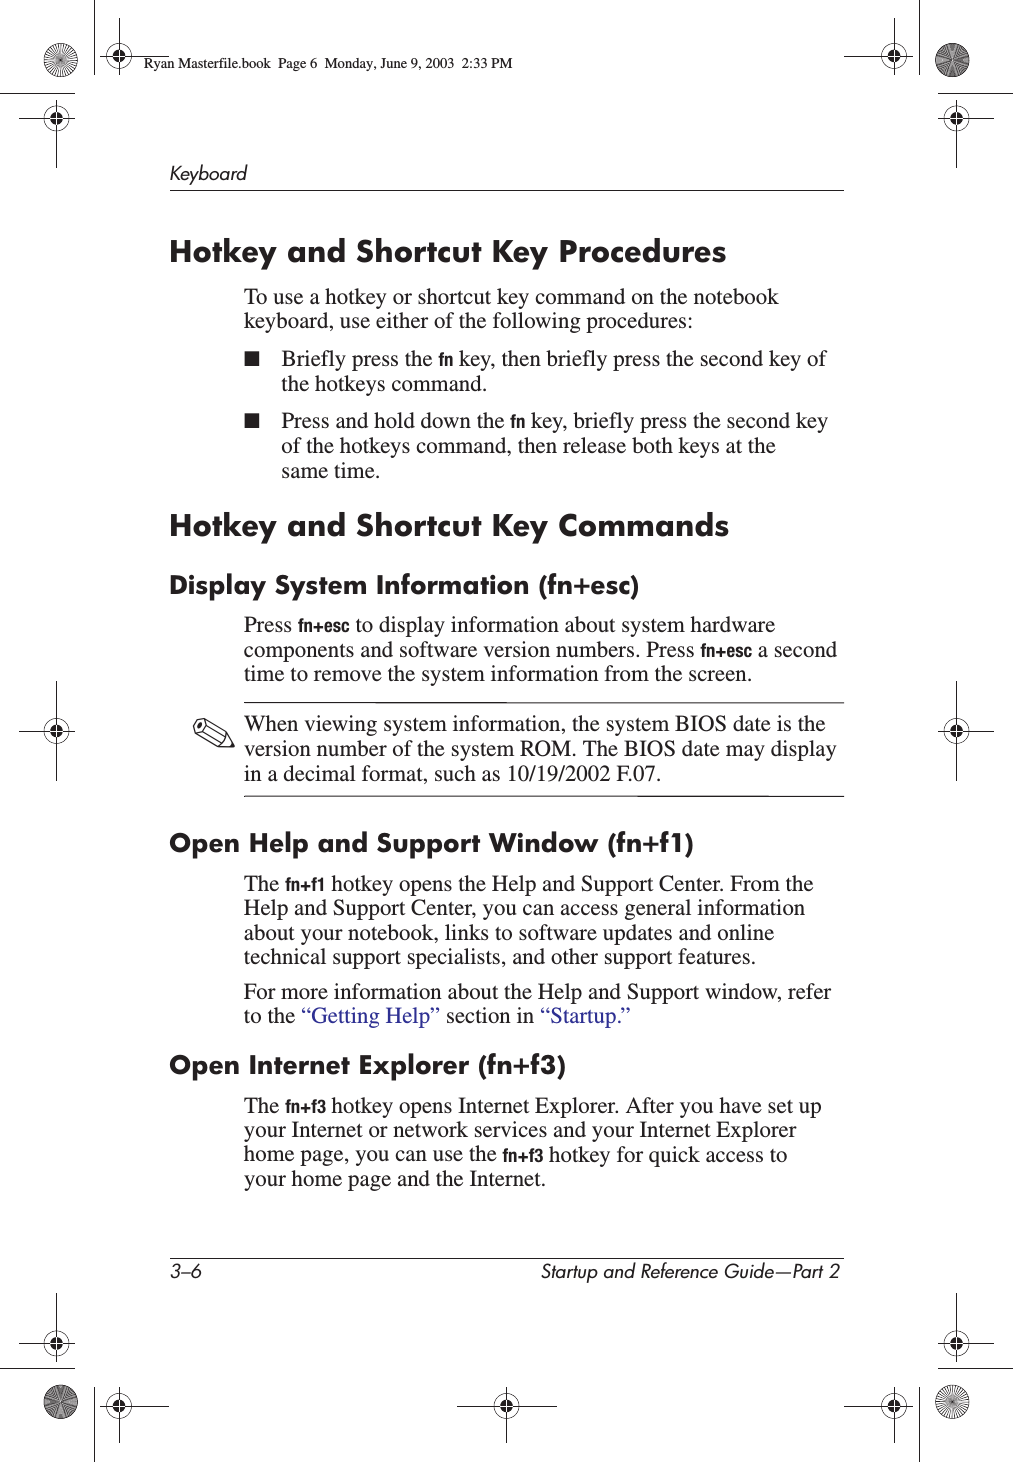 3–6 Startup and Reference Guide—Part 2KeyboardHotkey and Shortcut Key ProceduresTo use a hotkey or shortcut key command on the notebook keyboard, use either of the following procedures:■Briefly press the fn key, then briefly press the second key of the hotkeys command.■Press and hold down the fn key, briefly press the second key of the hotkeys command, then release both keys at the same time.Hotkey and Shortcut Key CommandsDisplay System Information (fn+esc)Press fn+esc to display information about system hardware components and software version numbers. Press fn+esc a second time to remove the system information from the screen.✎When viewing system information, the system BIOS date is the version number of the system ROM. The BIOS date may display in a decimal format, such as 10/19/2002 F.07.Open Help and Support Window (fn+f1)The fn+f1 hotkey opens the Help and Support Center. From the Help and Support Center, you can access general information about your notebook, links to software updates and online technical support specialists, and other support features.For more information about the Help and Support window, refer to the “Getting Help” section in “Startup.”Open Internet Explorer (fn+f3)The fn+f3 hotkey opens Internet Explorer. After you have set up your Internet or network services and your Internet Explorer home page, you can use the fn+f3 hotkey for quick access to your home page and the Internet.Ryan Masterfile.book  Page 6  Monday, June 9, 2003  2:33 PM